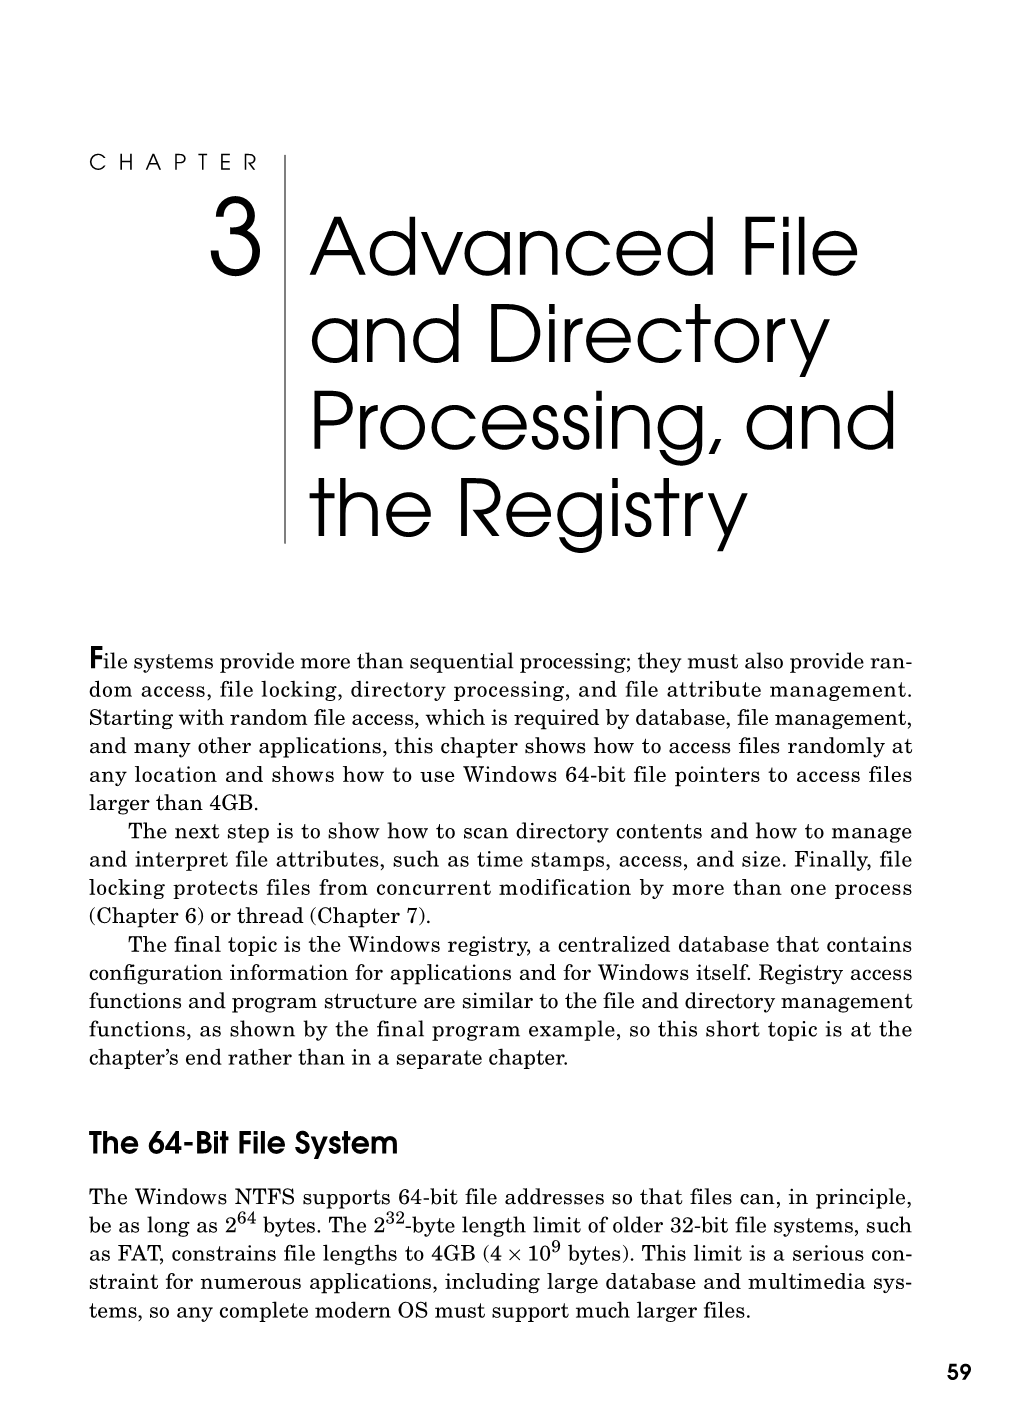 3 Advanced File and Directory Processing, and the Registry